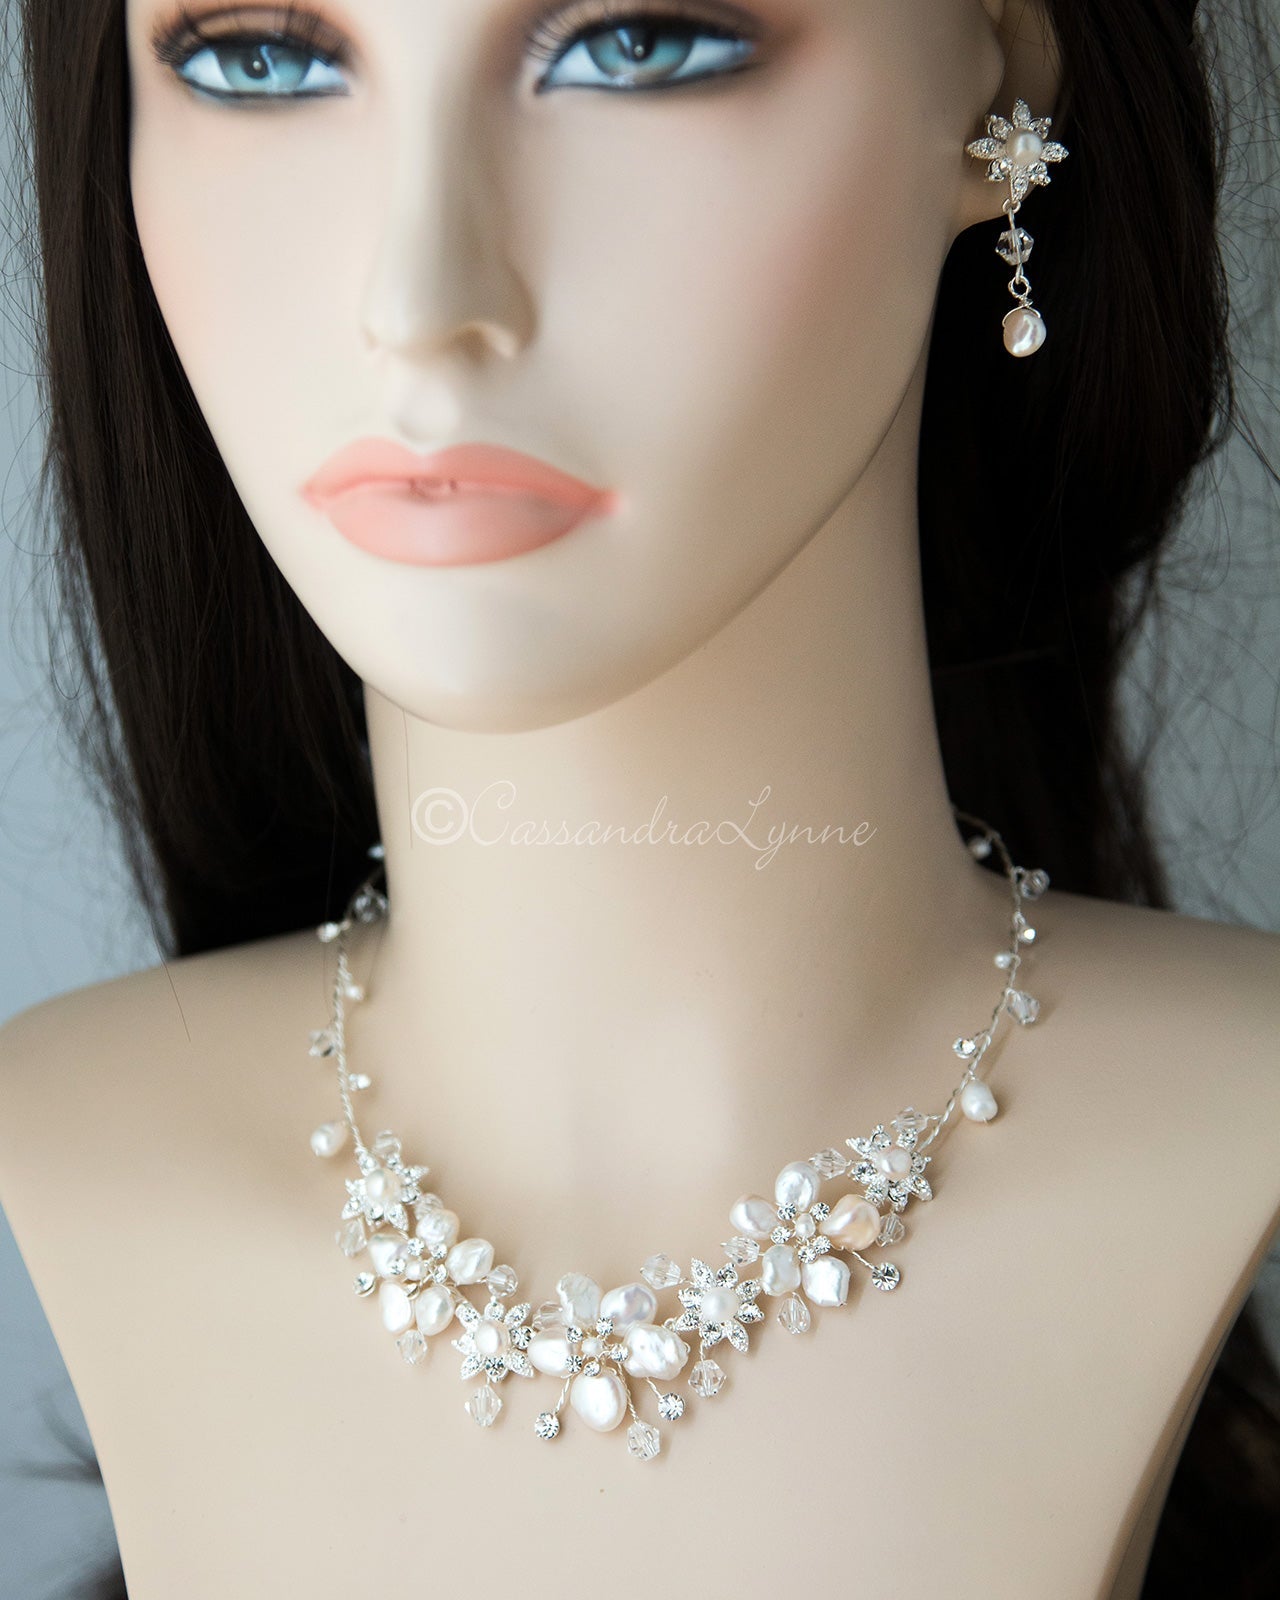 Bridal Necklace of Keshi Pearls and Crystals - Cassandra Lynne